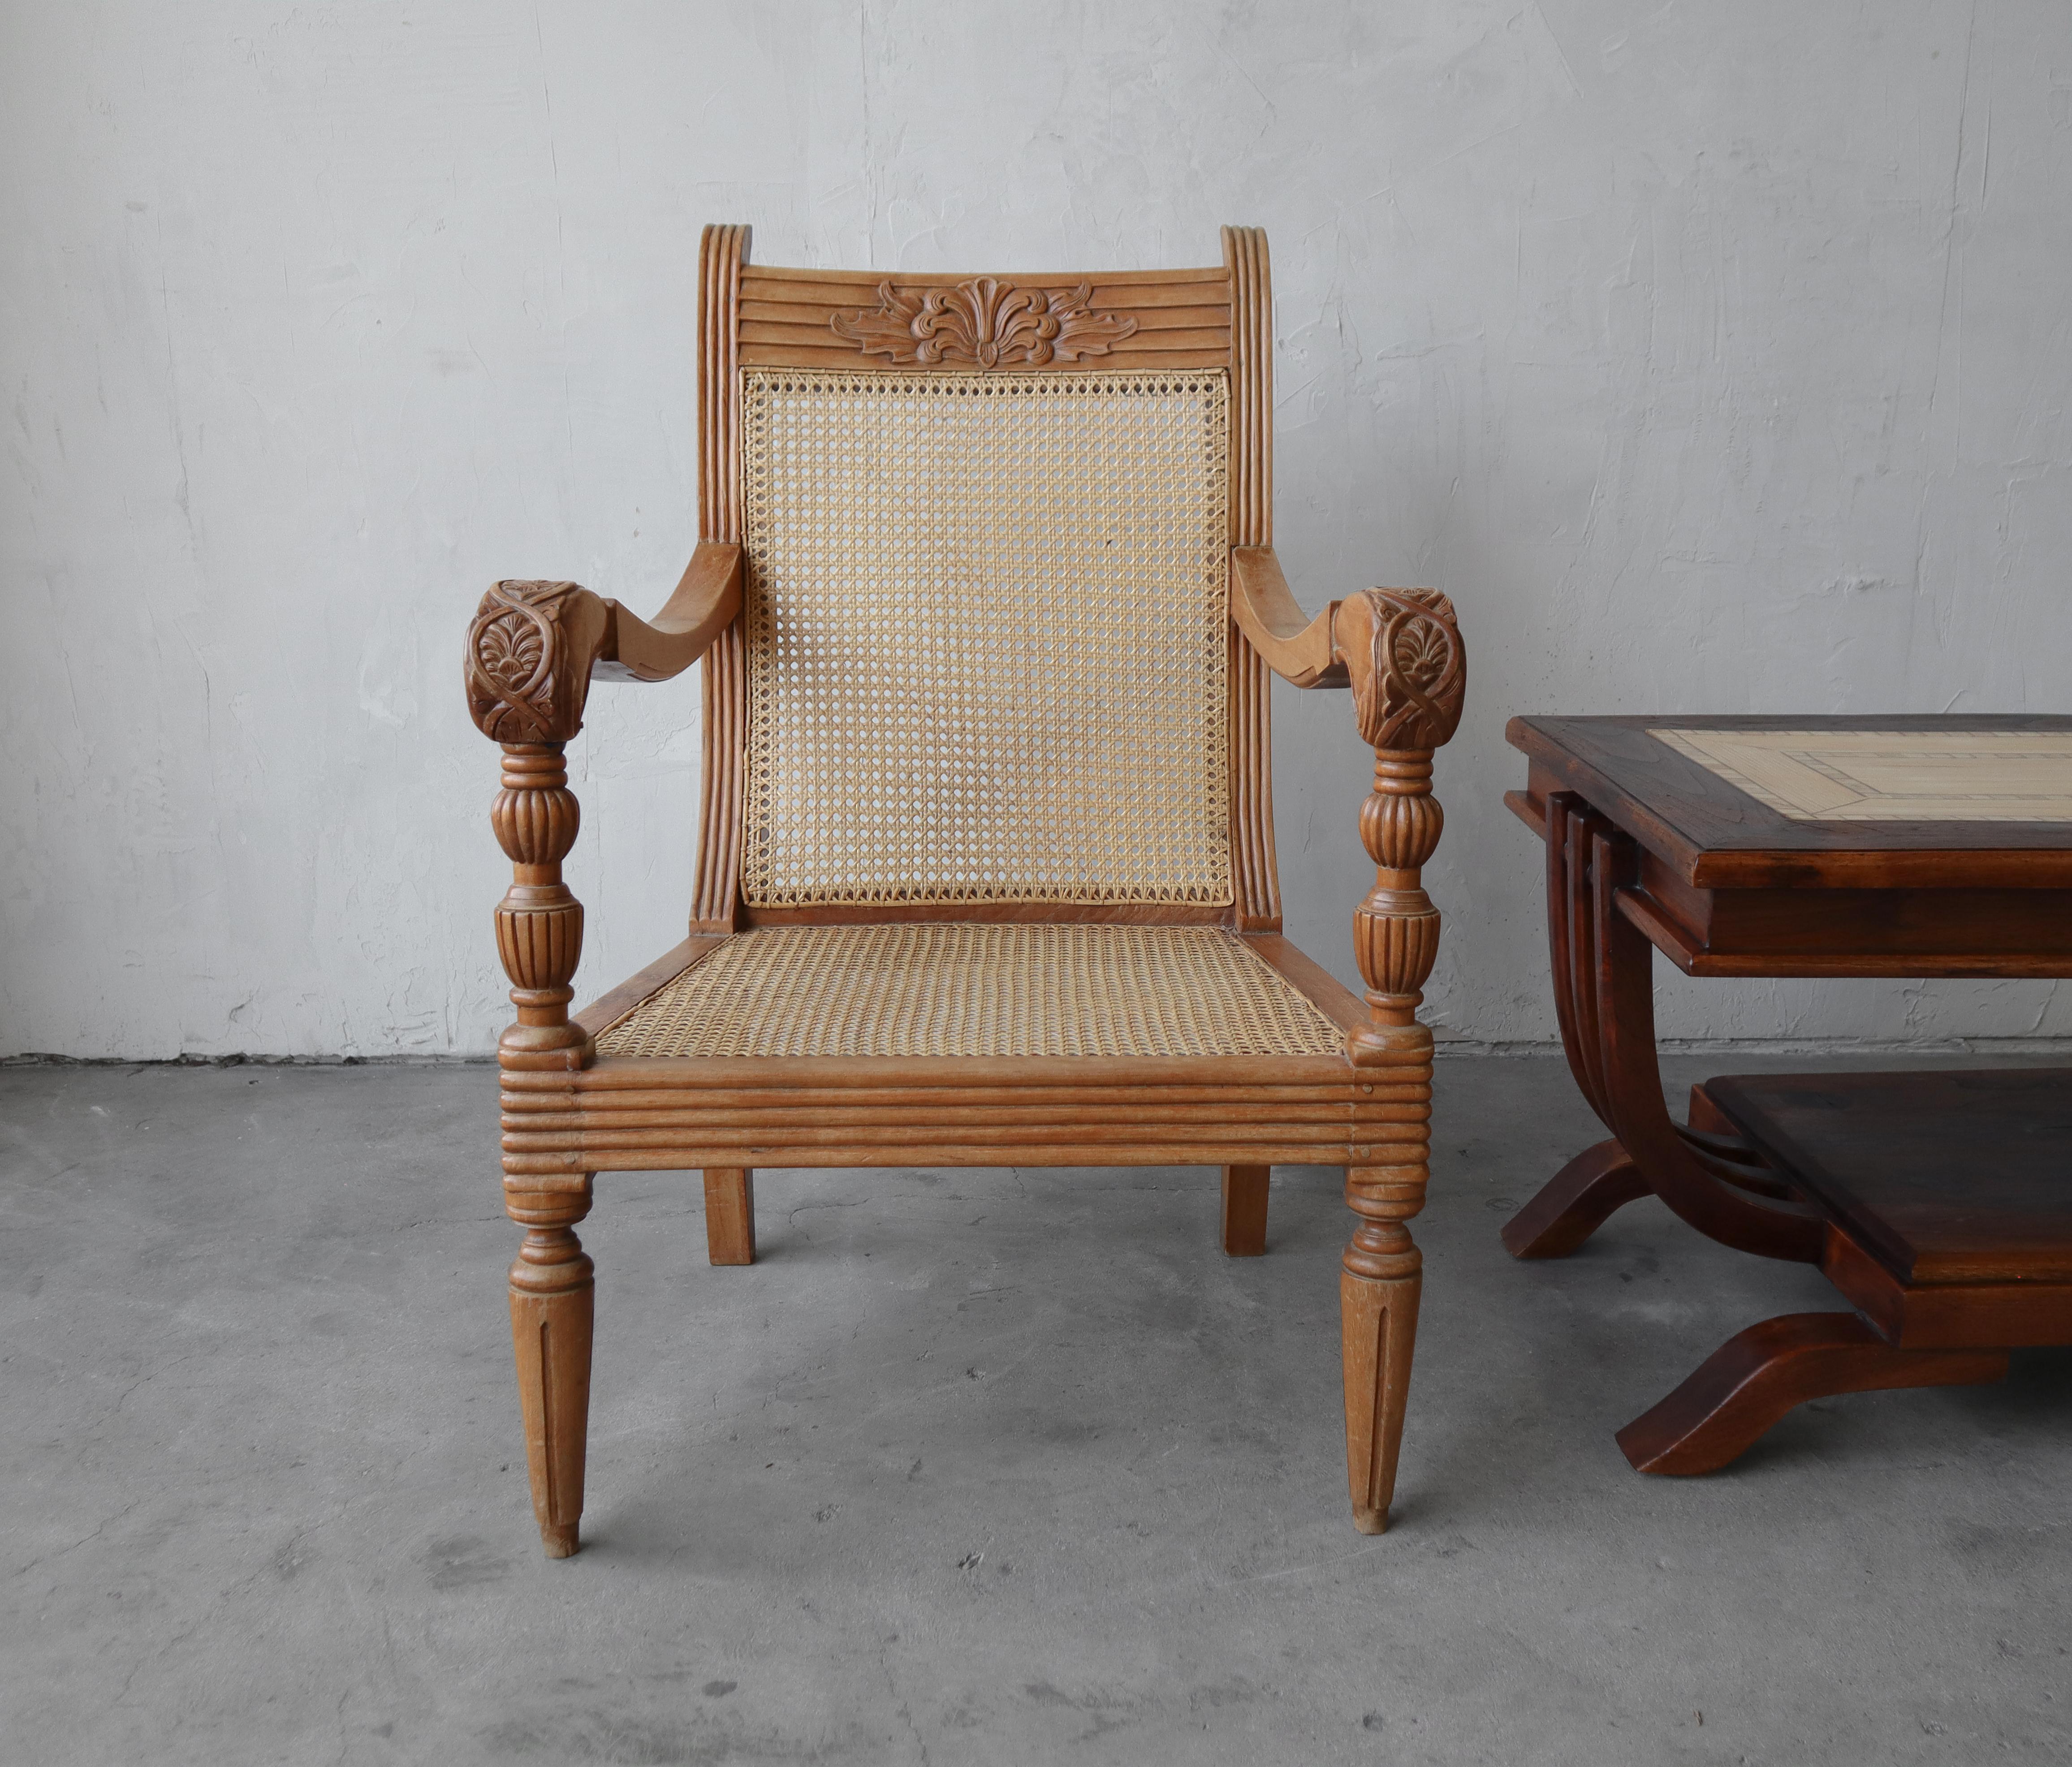 Antique British Colonial Cane and Carved Teak Lounge Chair In Good Condition For Sale In Las Vegas, NV